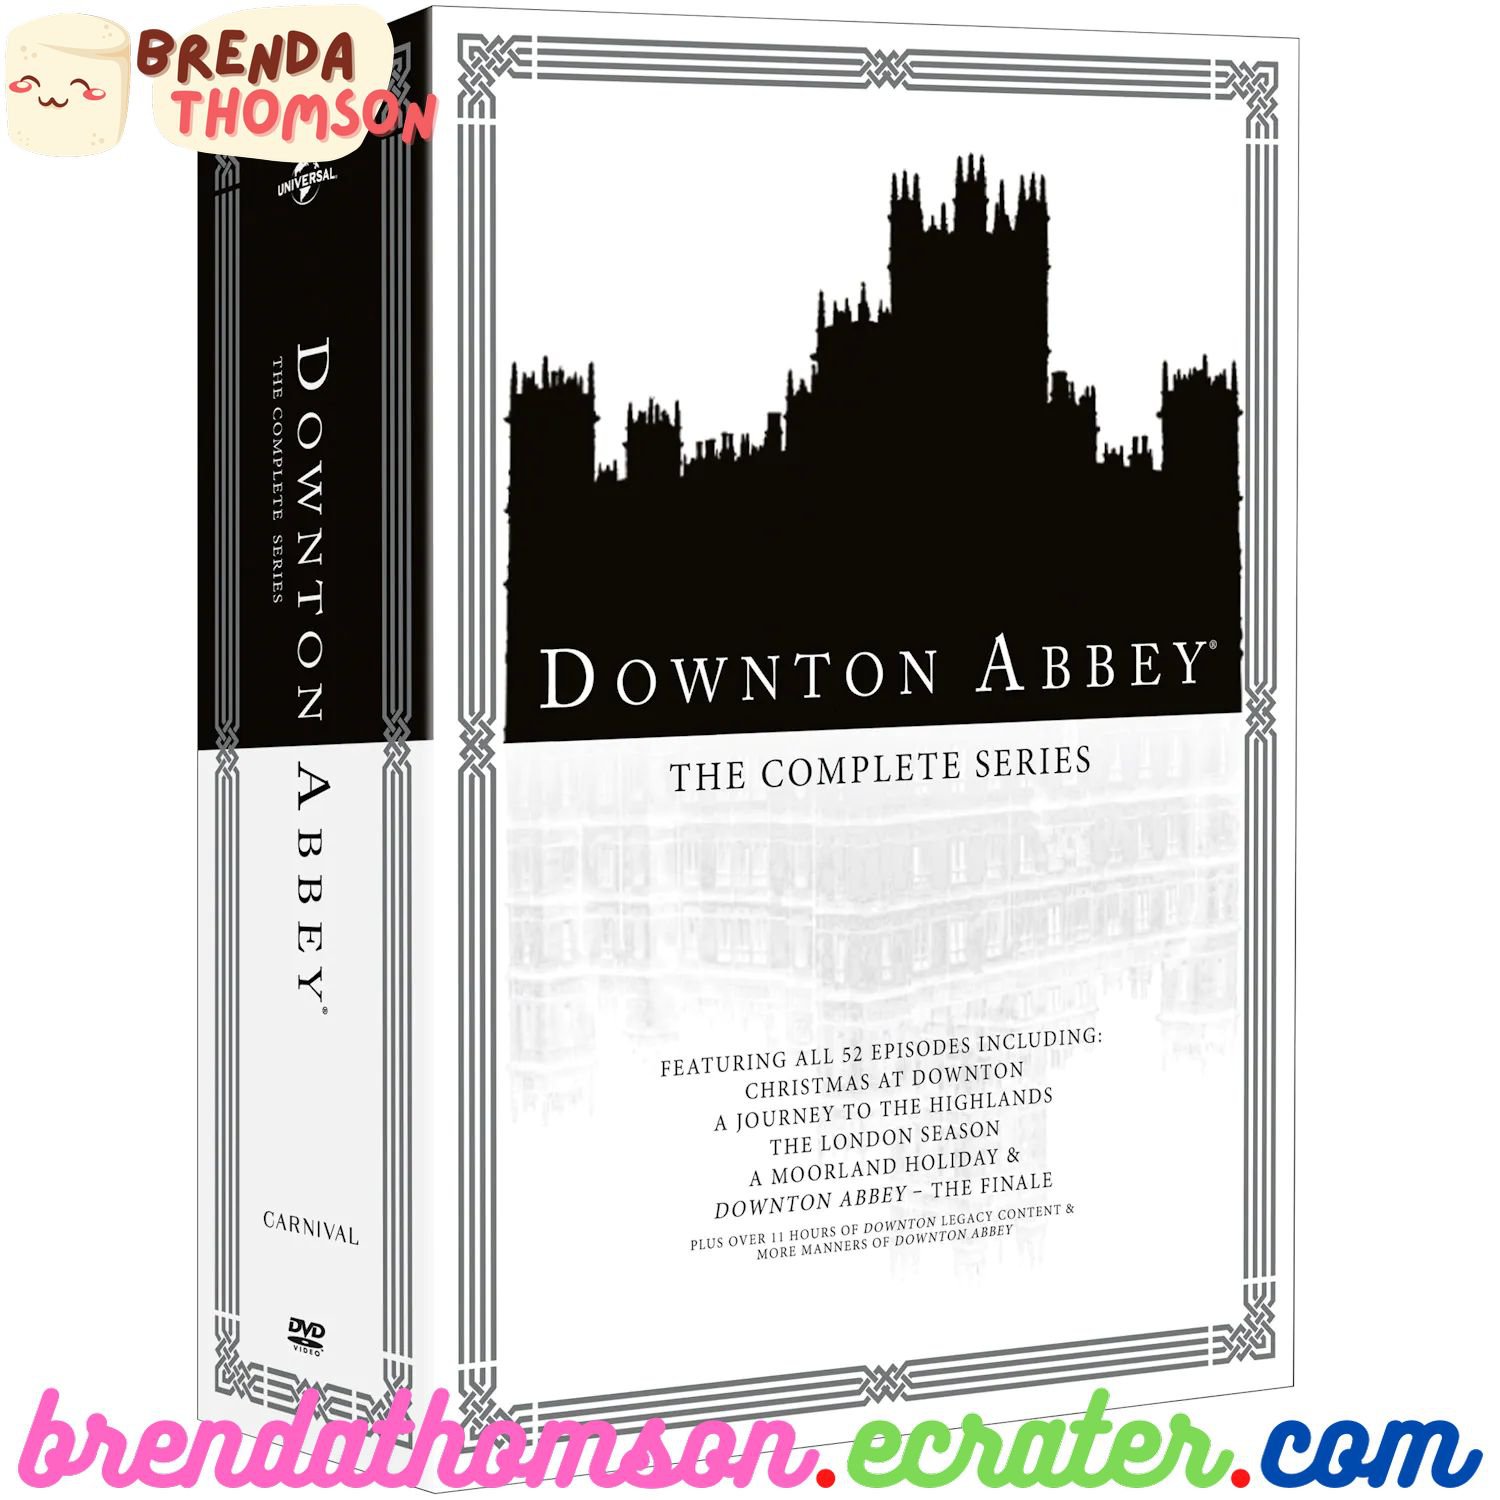 Downton Abbey: The Complete Series DVD (Brand New)